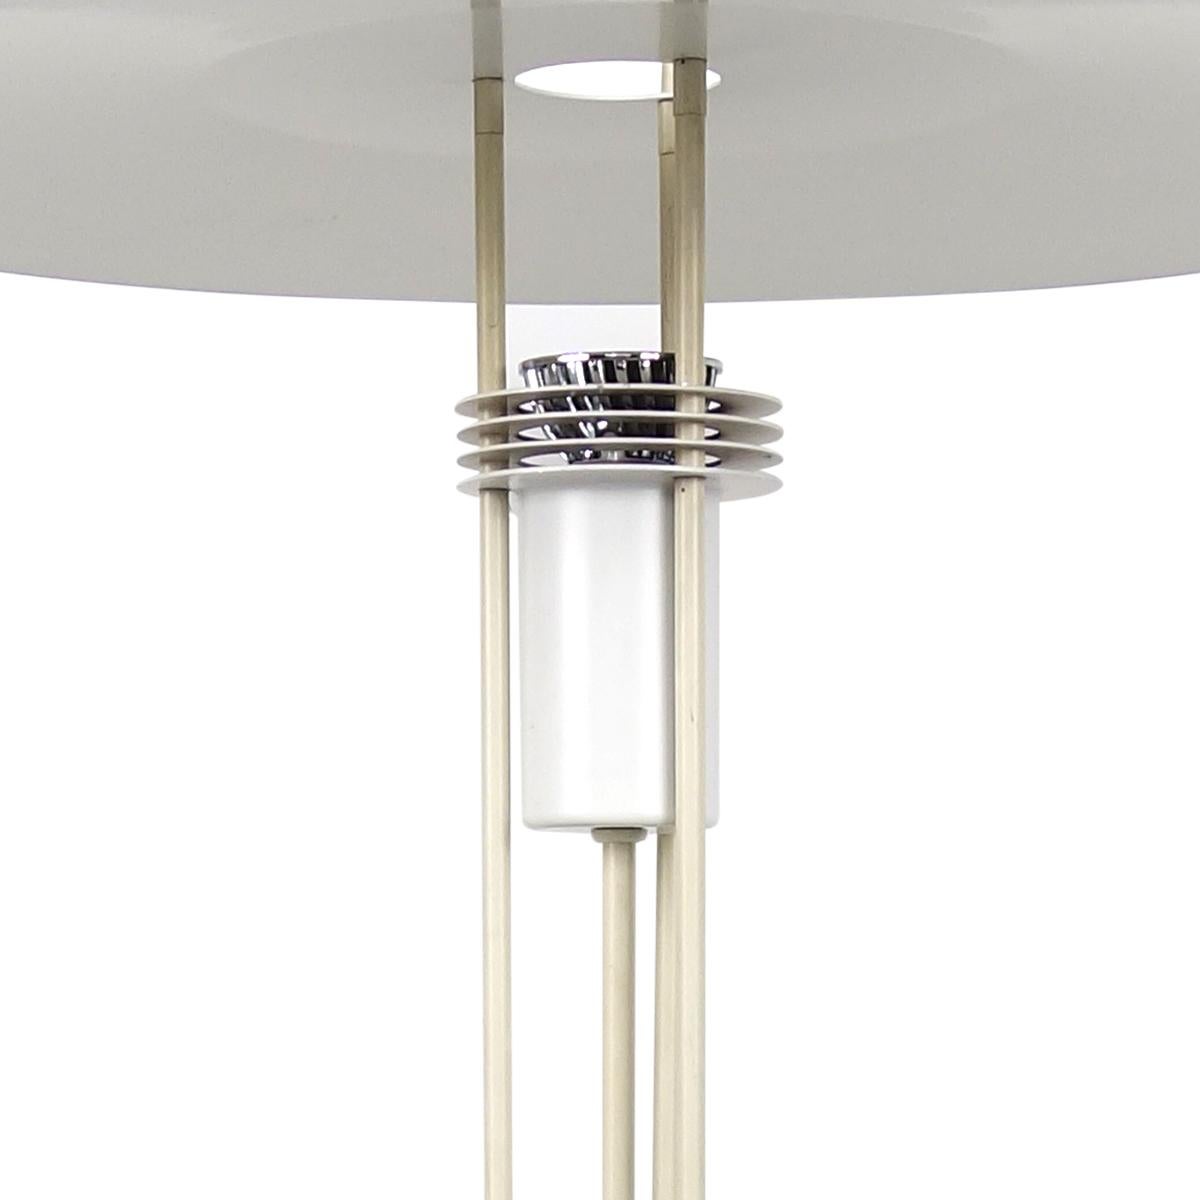 Elegant floor lamp designed and made by Danish lamp specialist Frandsen.
It consists of a round base on which three tubes have been mounted, carrying a two level shade.
The way the light comes out is really beautiful.